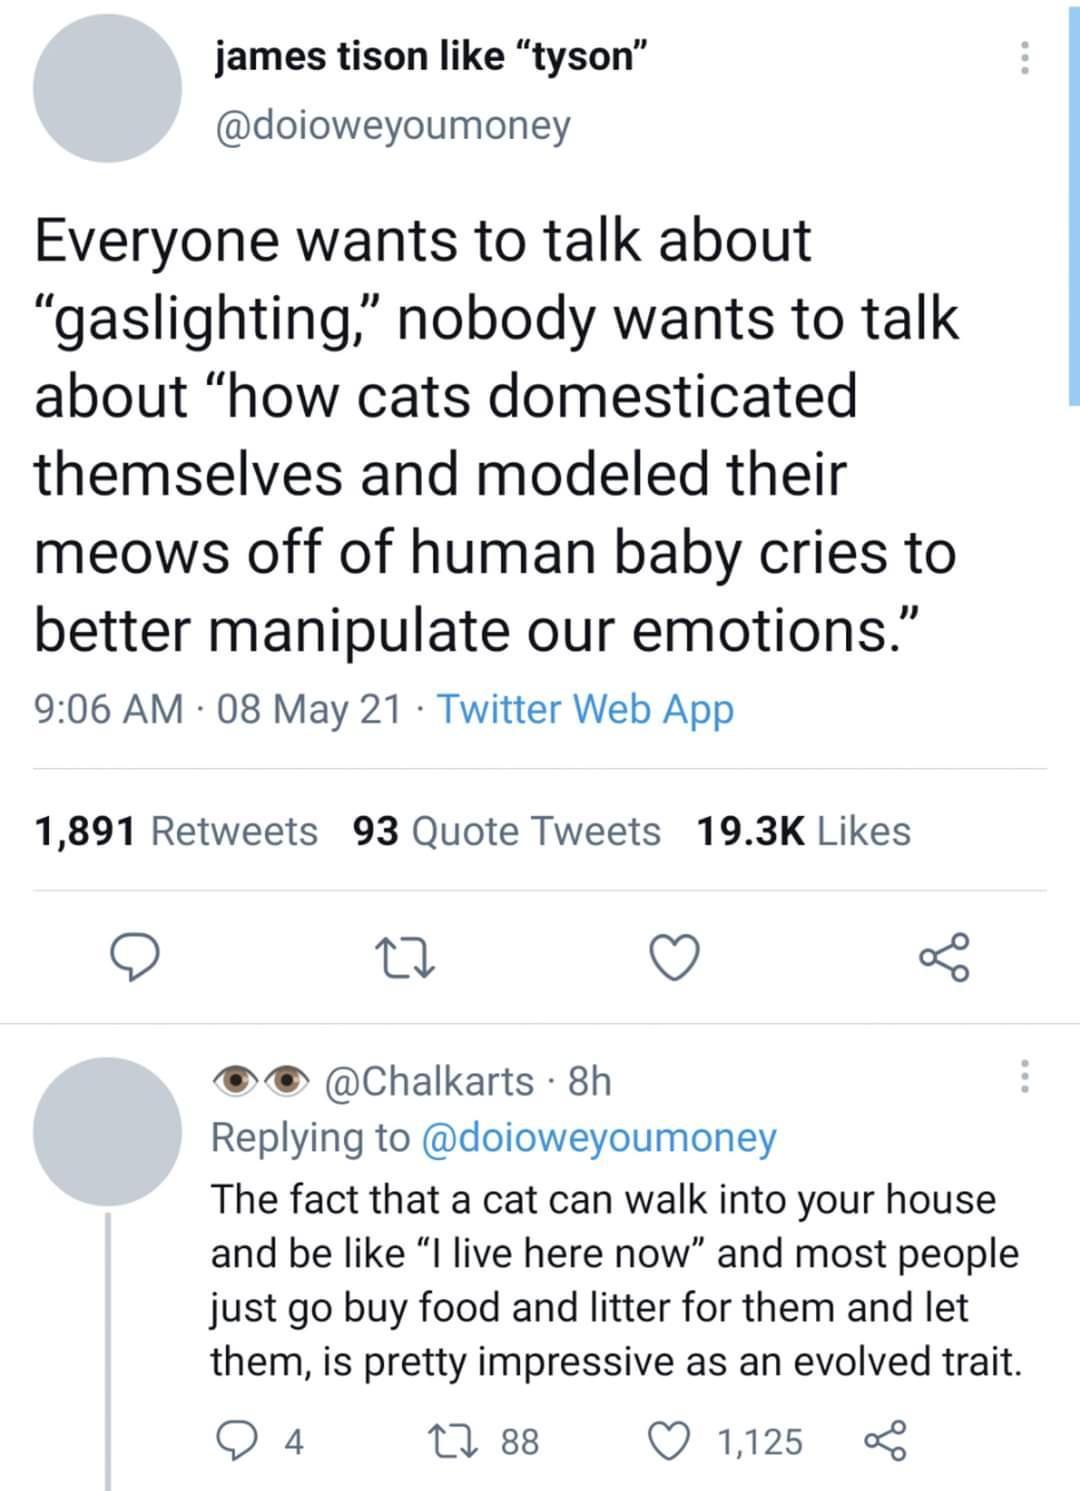 girls with curly hair straighten it girls - james tison "tyson" Everyone wants to talk about gaslighting," nobody wants to talk about "how cats domesticated themselves and modeled their meows off of human baby cries to better manipulate our emotions." 08 